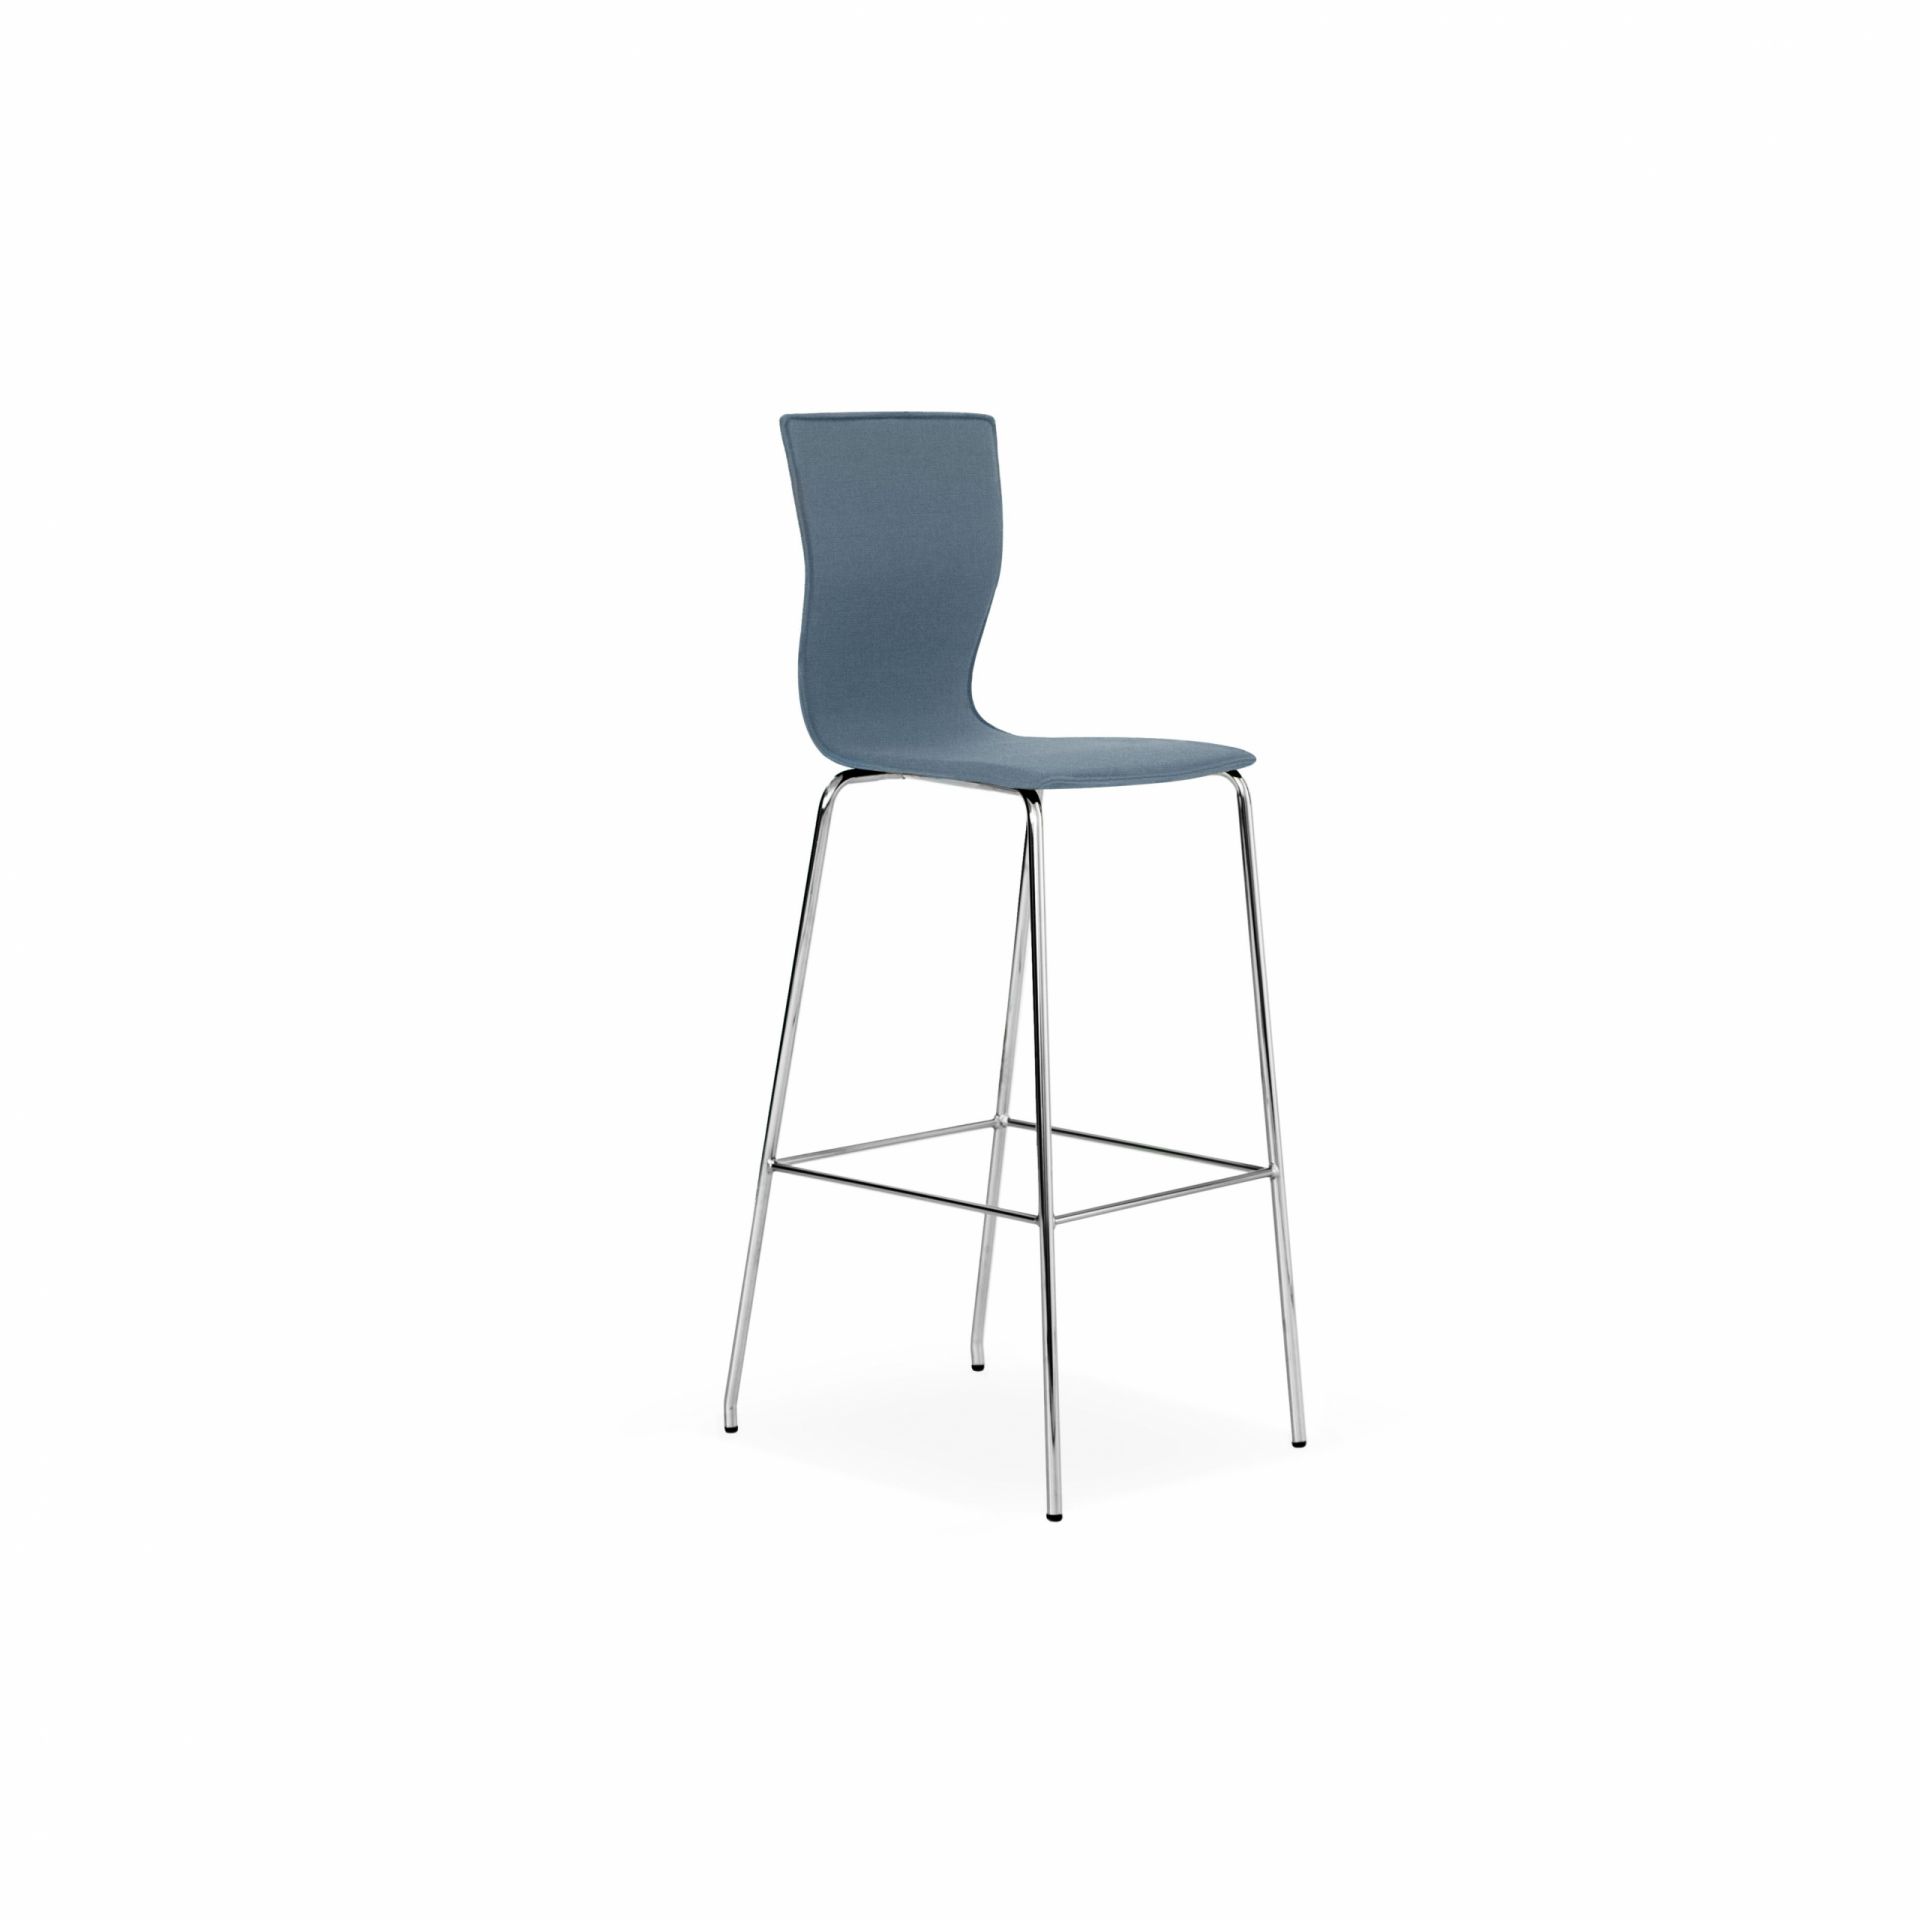 Graf Bar chair product image 1